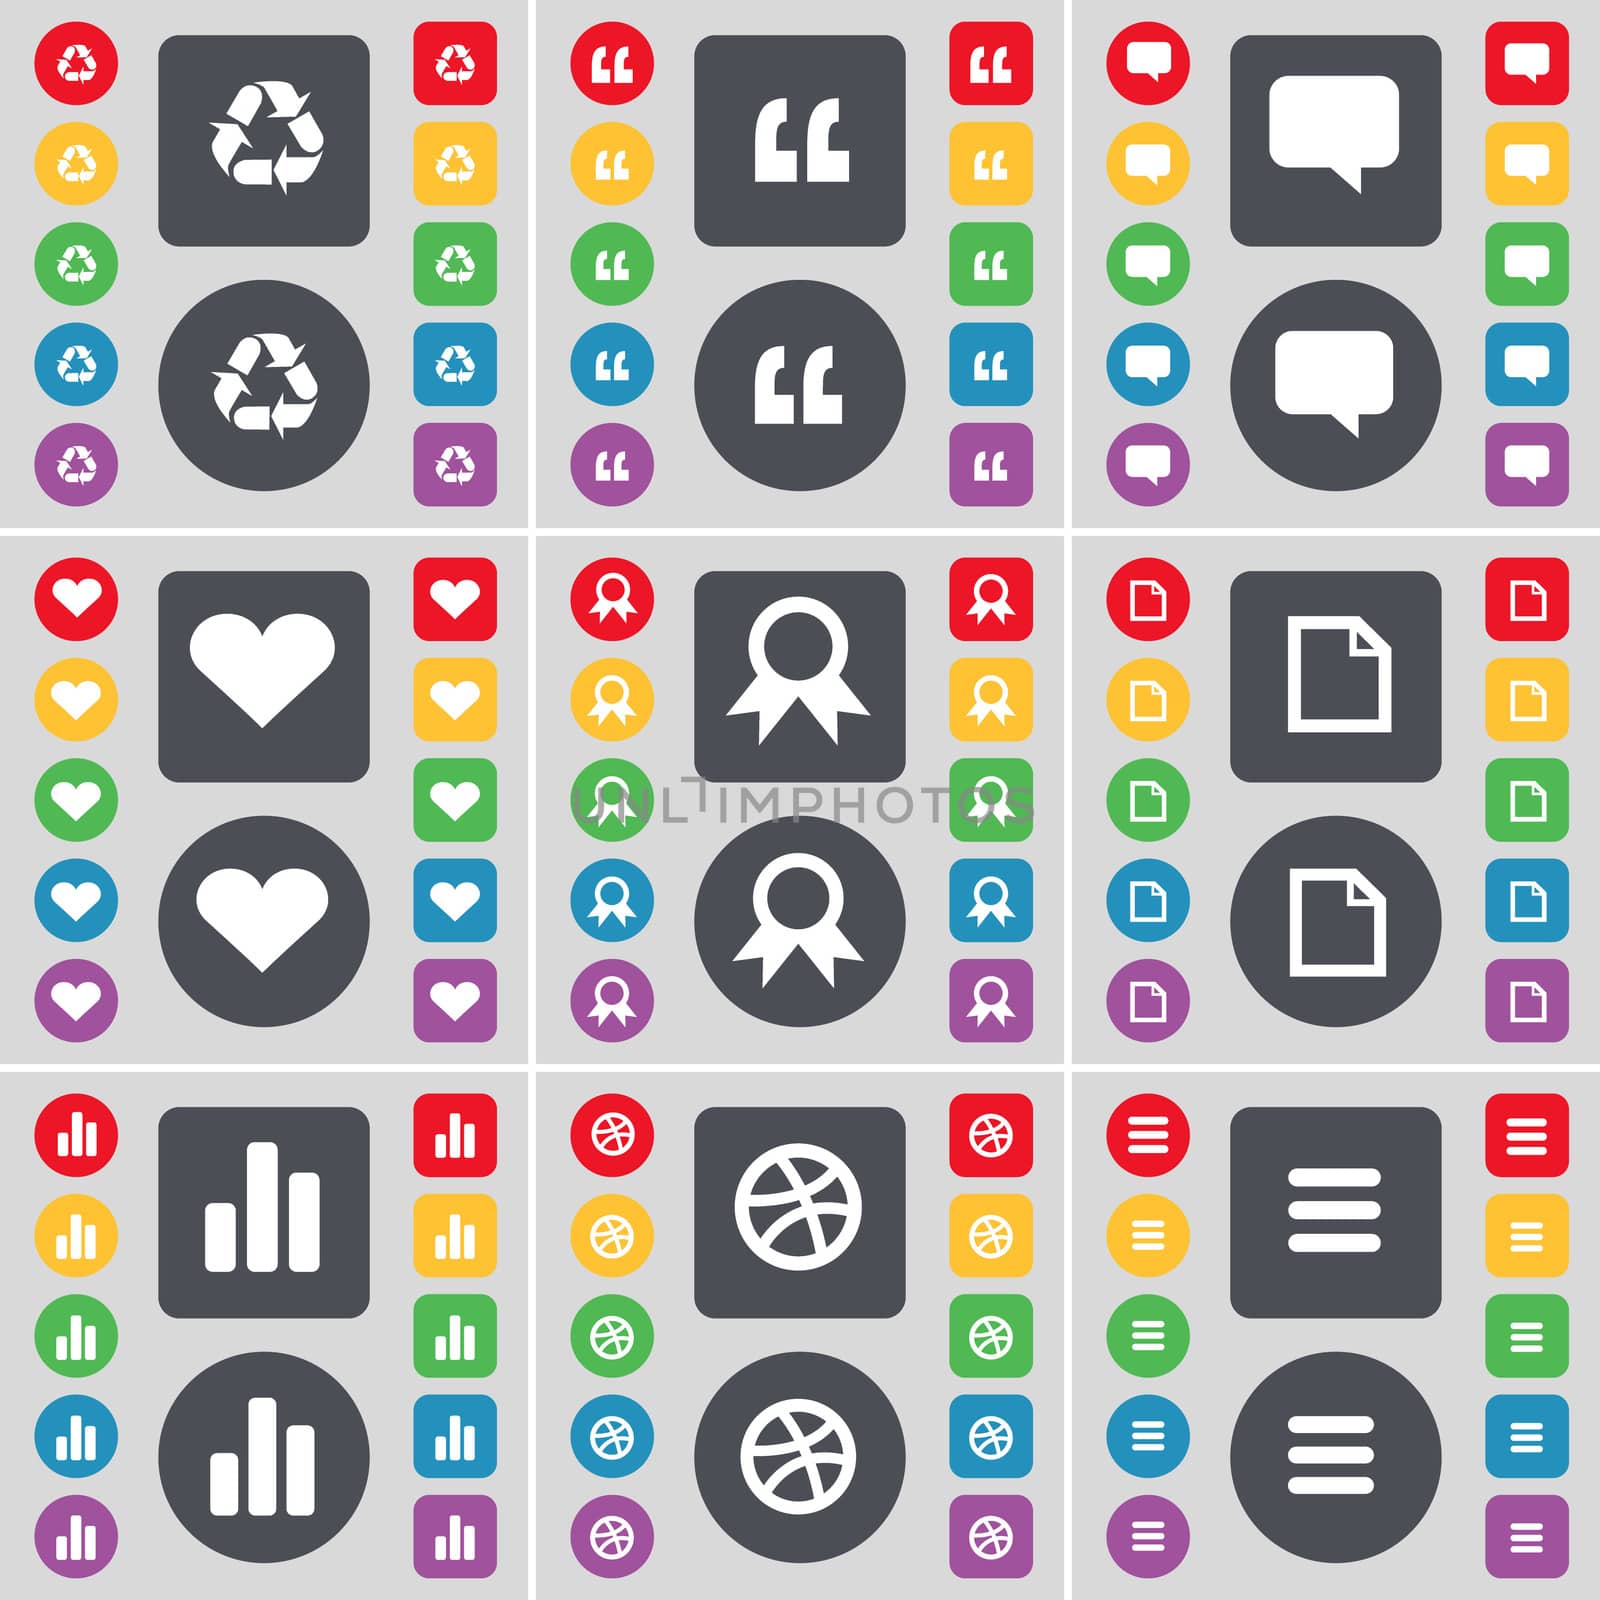 Recycling, Quotation mark, Chat bubble, Heart, Medal, File, Diagram, Ball, Apps icon symbol. A large set of flat, colored buttons for your design. illustration